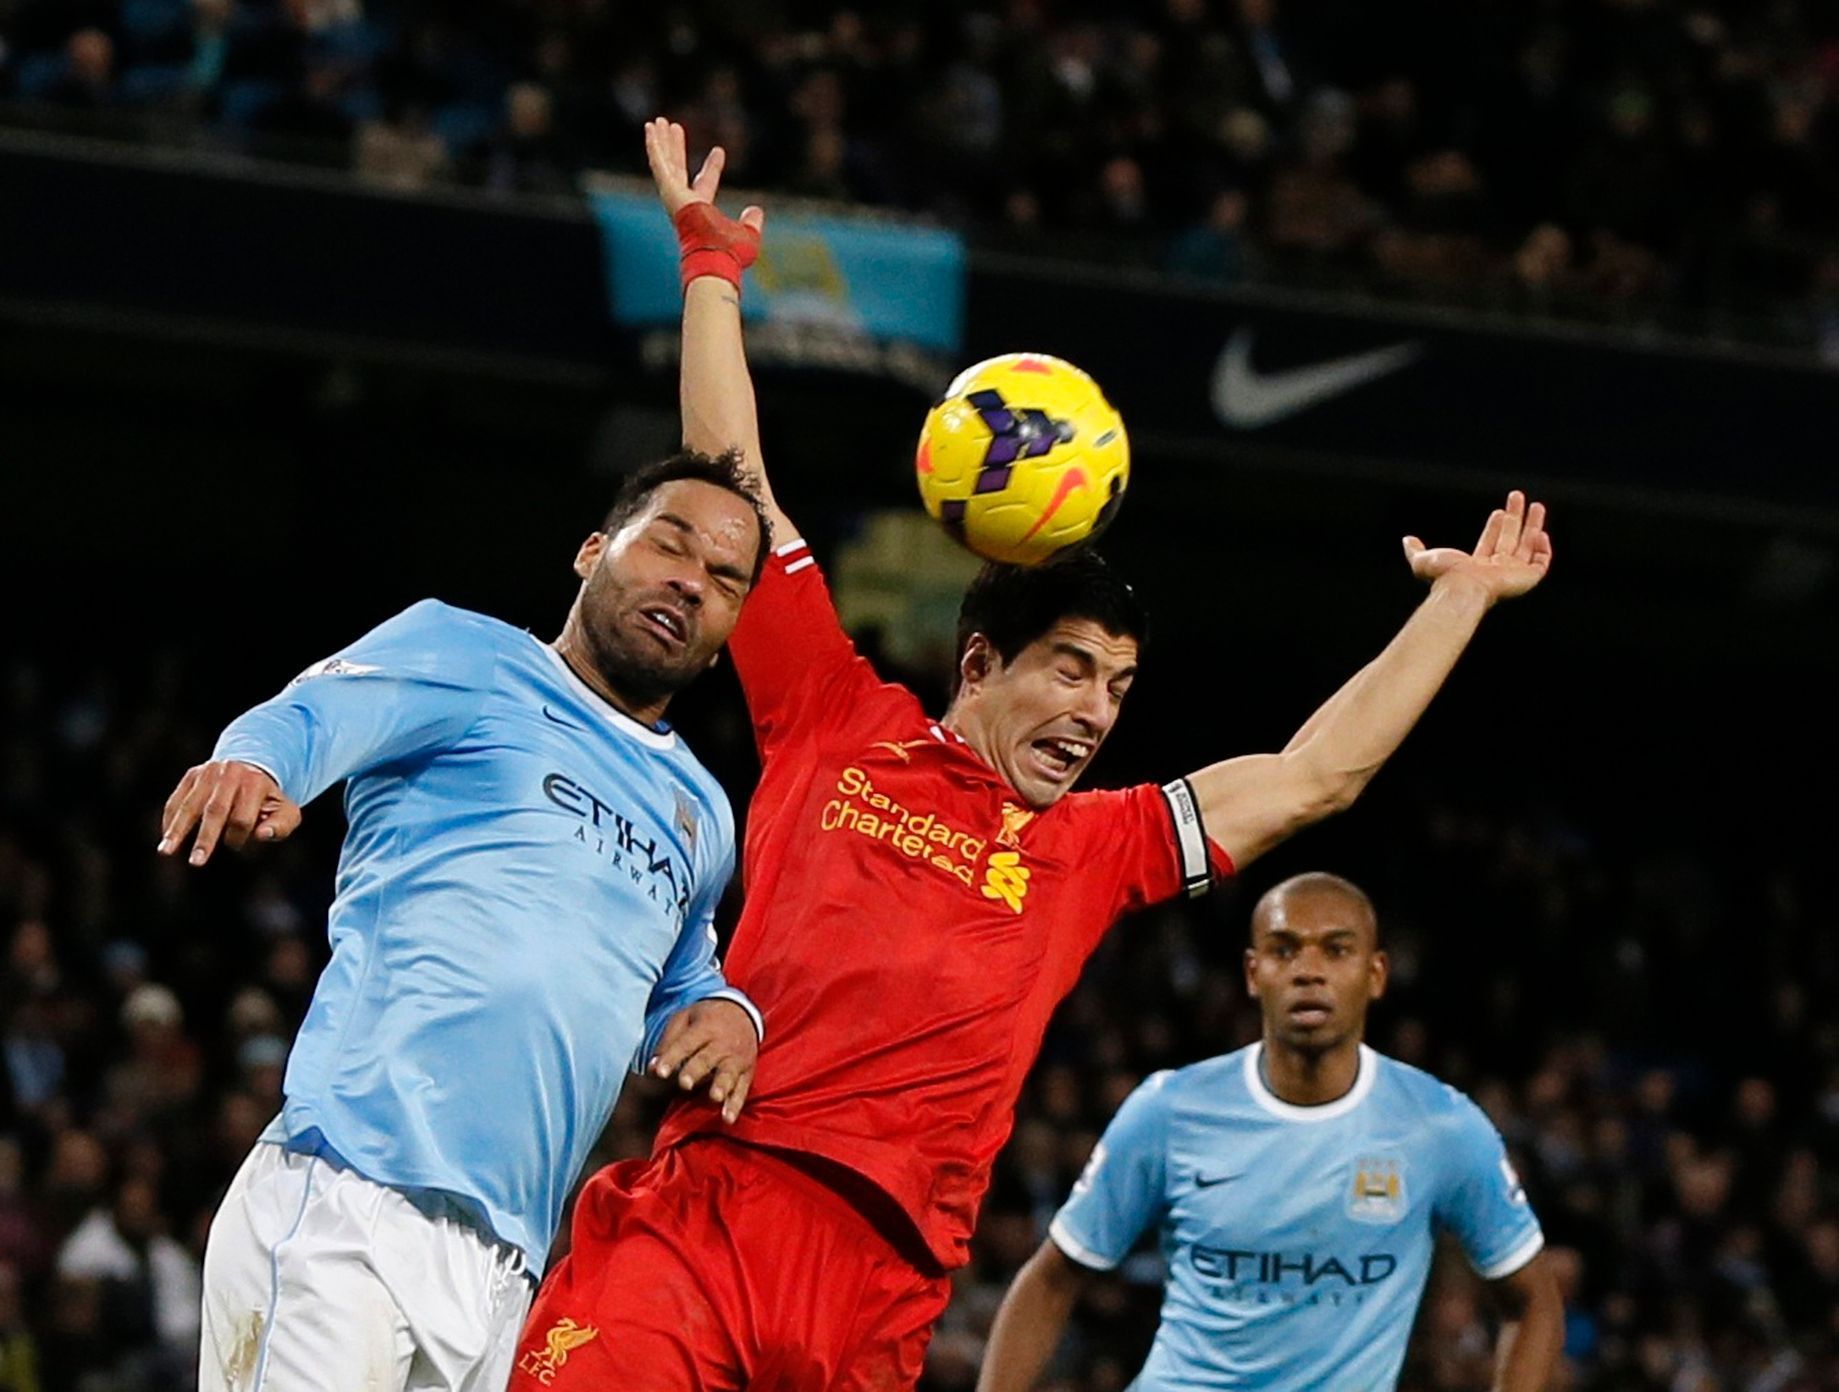 Liverpool's Suarez is challenged by Manchester City's Lescott during their English Premier League soccer match in Manchester